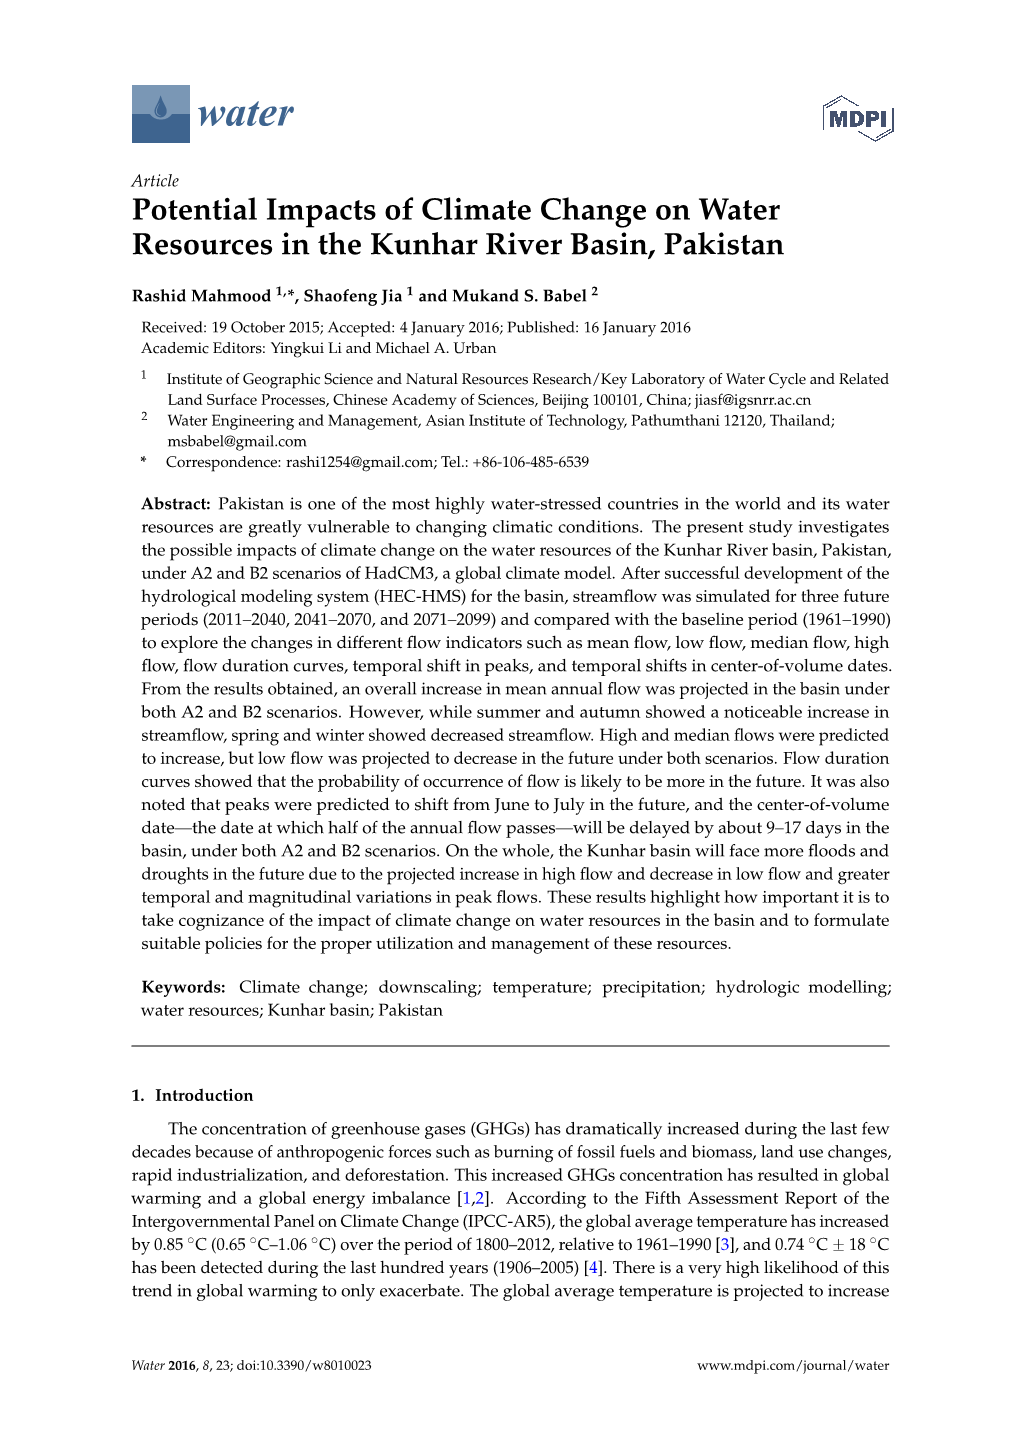 Potential Impacts of Climate Change on Water Resources in the Kunhar River Basin, Pakistan